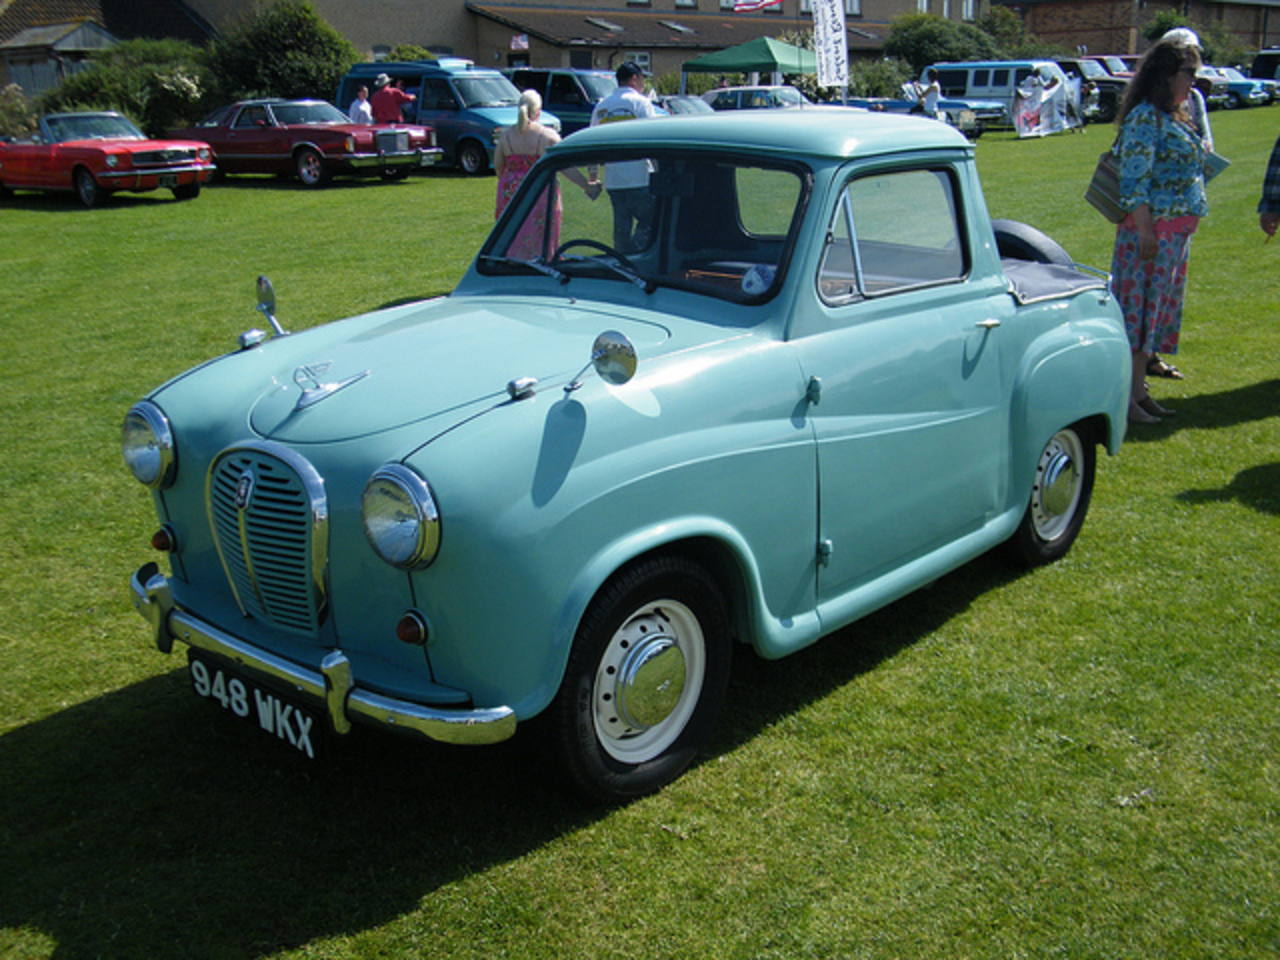 2012 - Selsey Classic Car Show - a set on Flickr